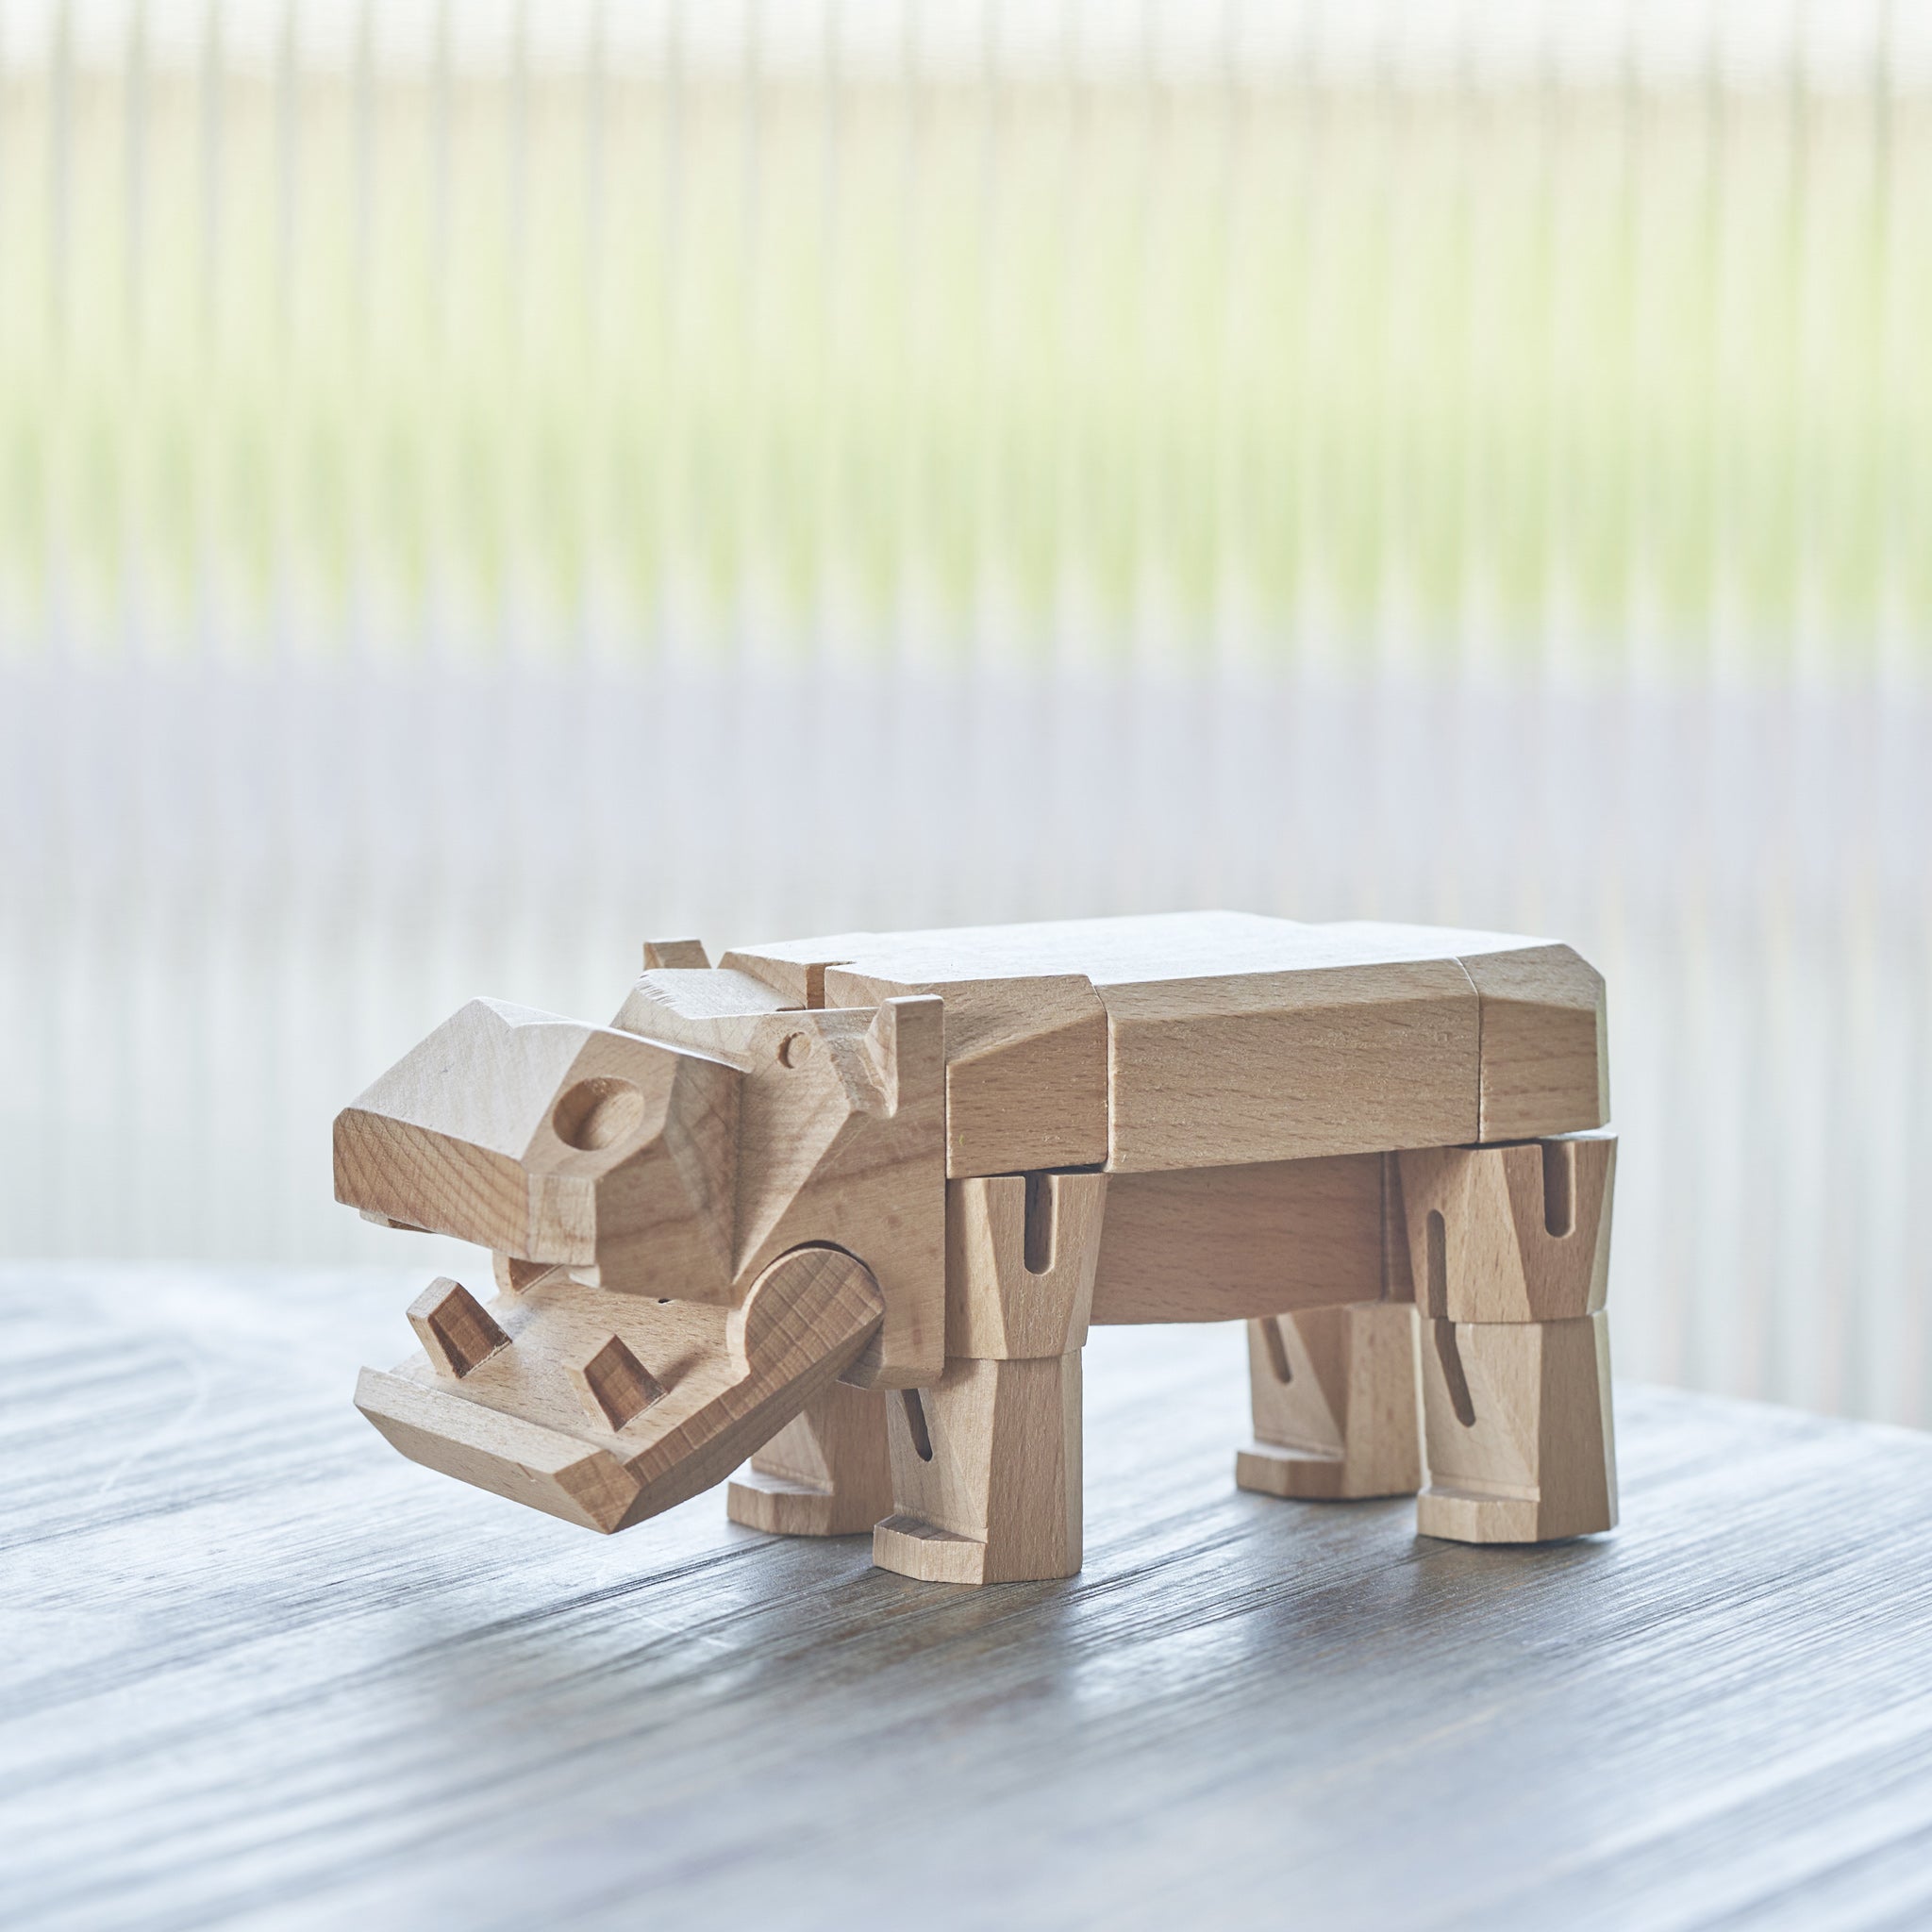 Morphits ® Hippo Wooden Toy: Explore the Wild with Poseable Wooden Playset Friends - Yoshiaki Ito Design Stand N2